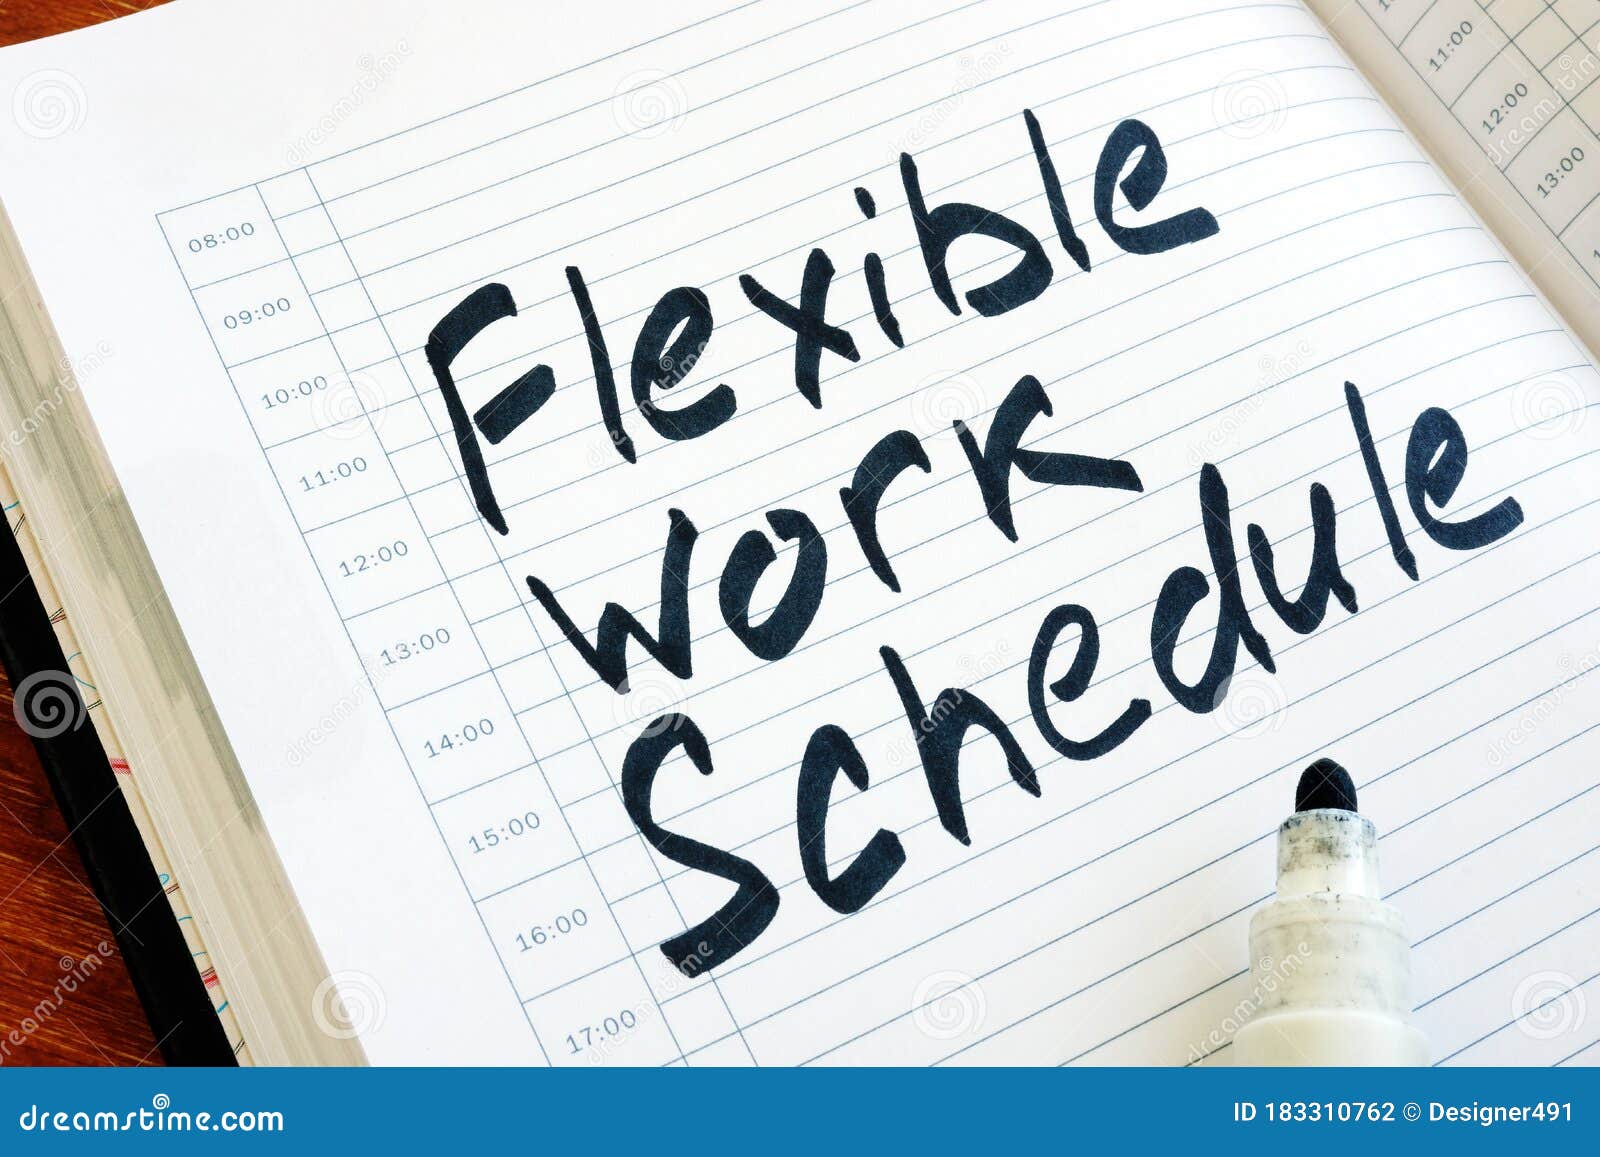 flexible work schedule sign in the notepad